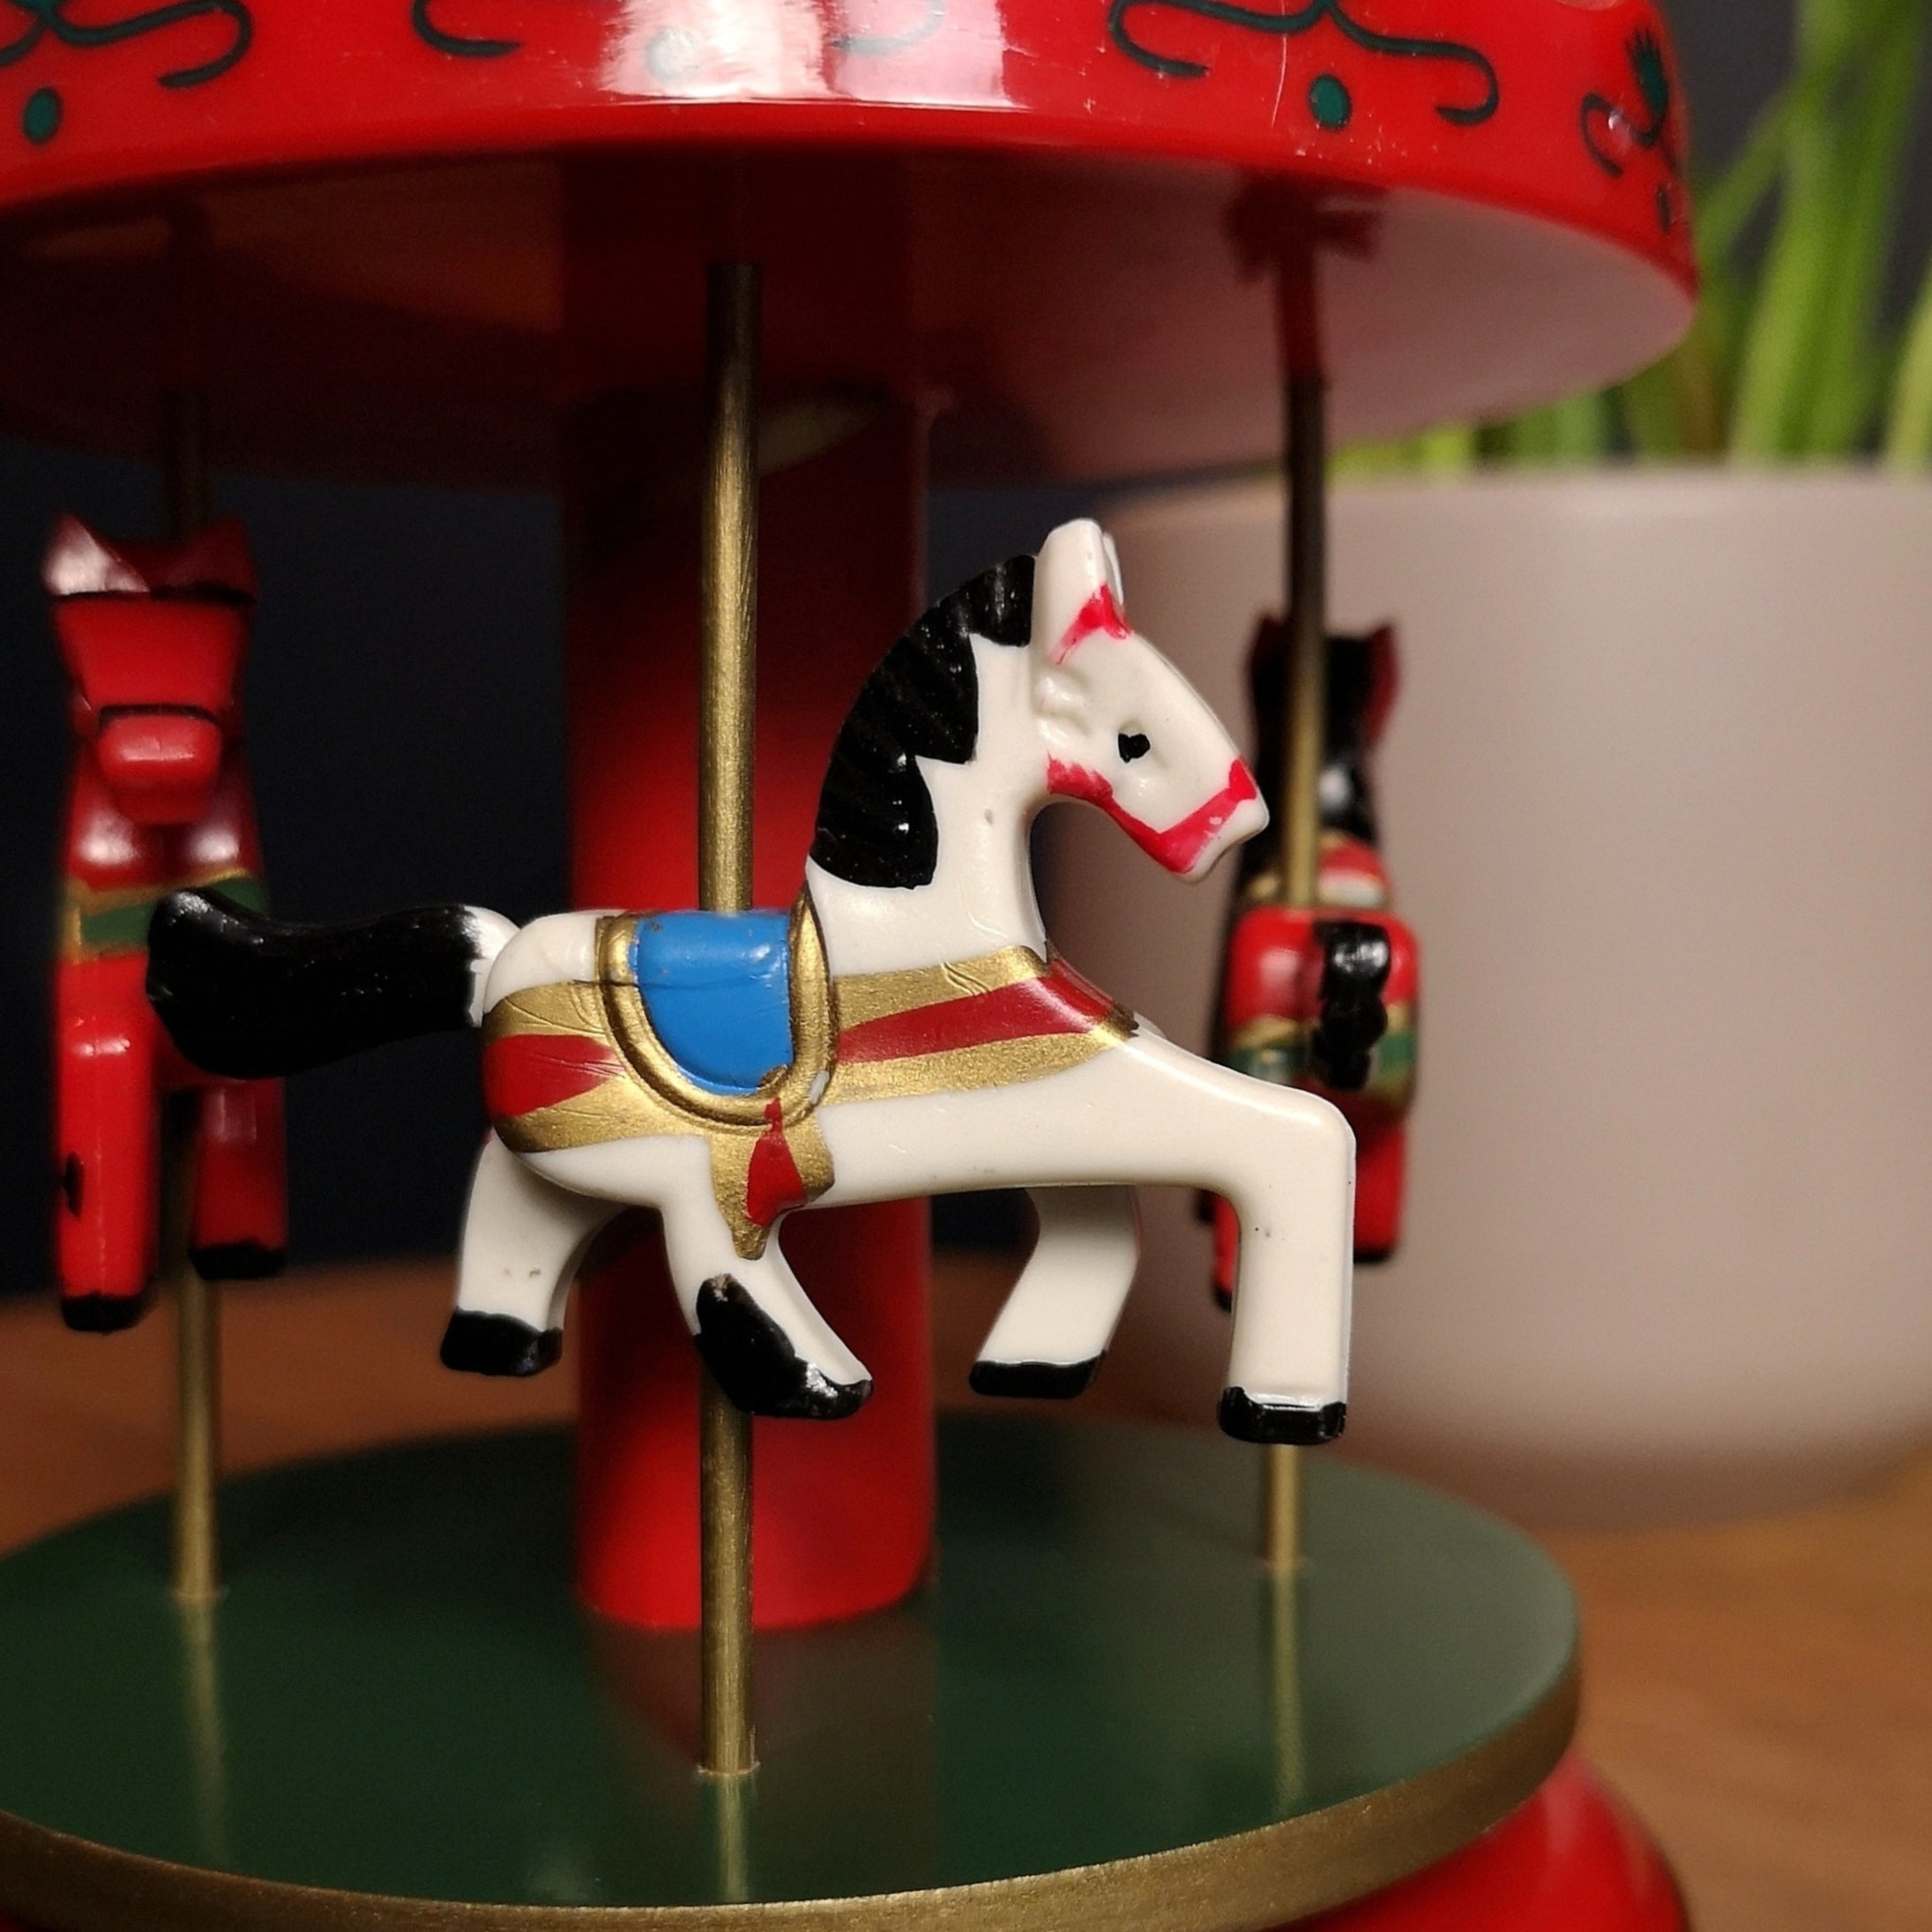 18cm Wind Up Musical Carousel Indoor Christmas Decoration